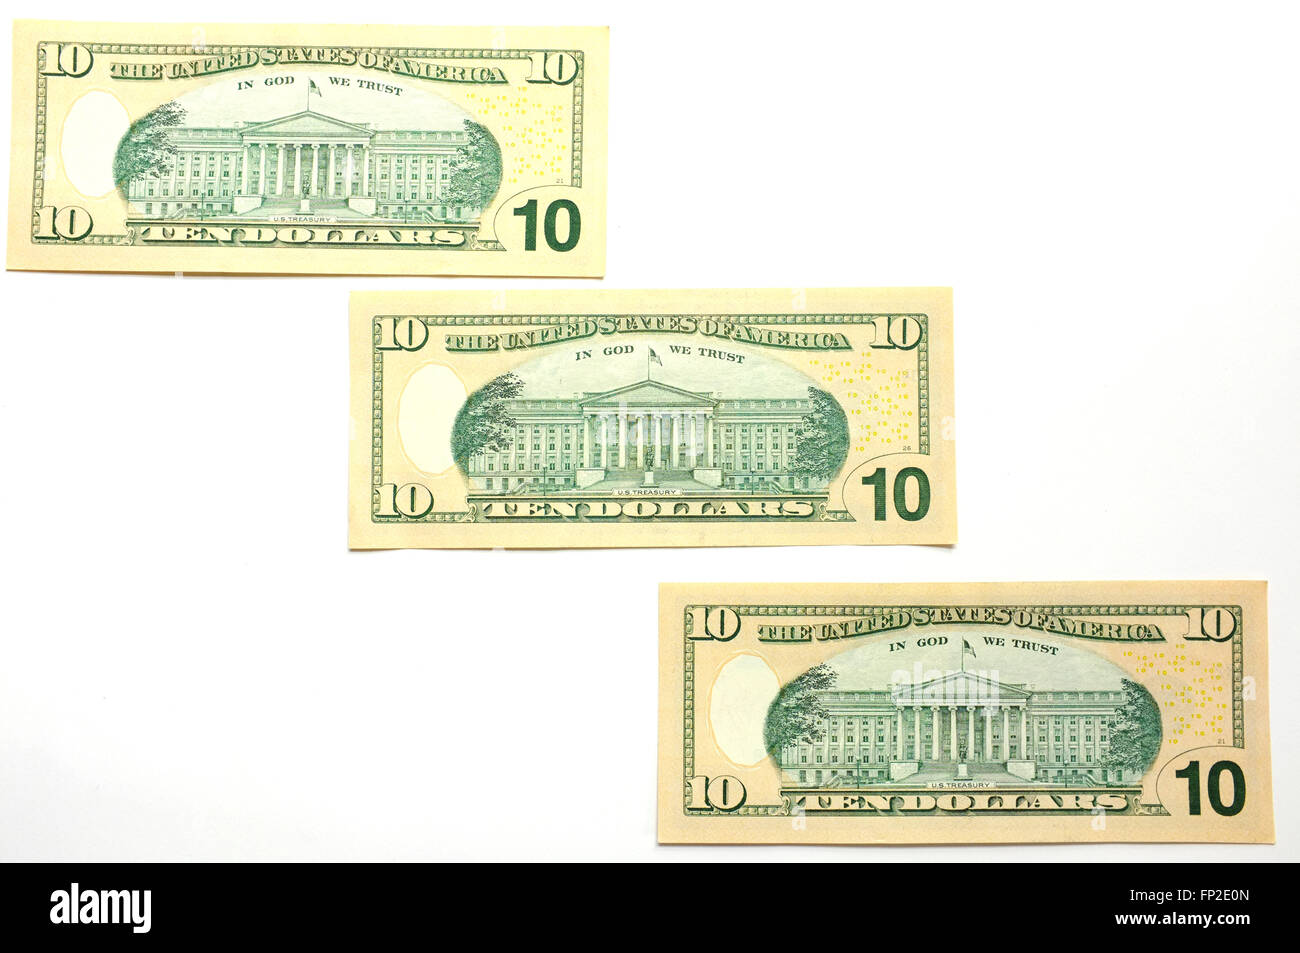 Three American $10 notes photographed against a white background Stock Photo